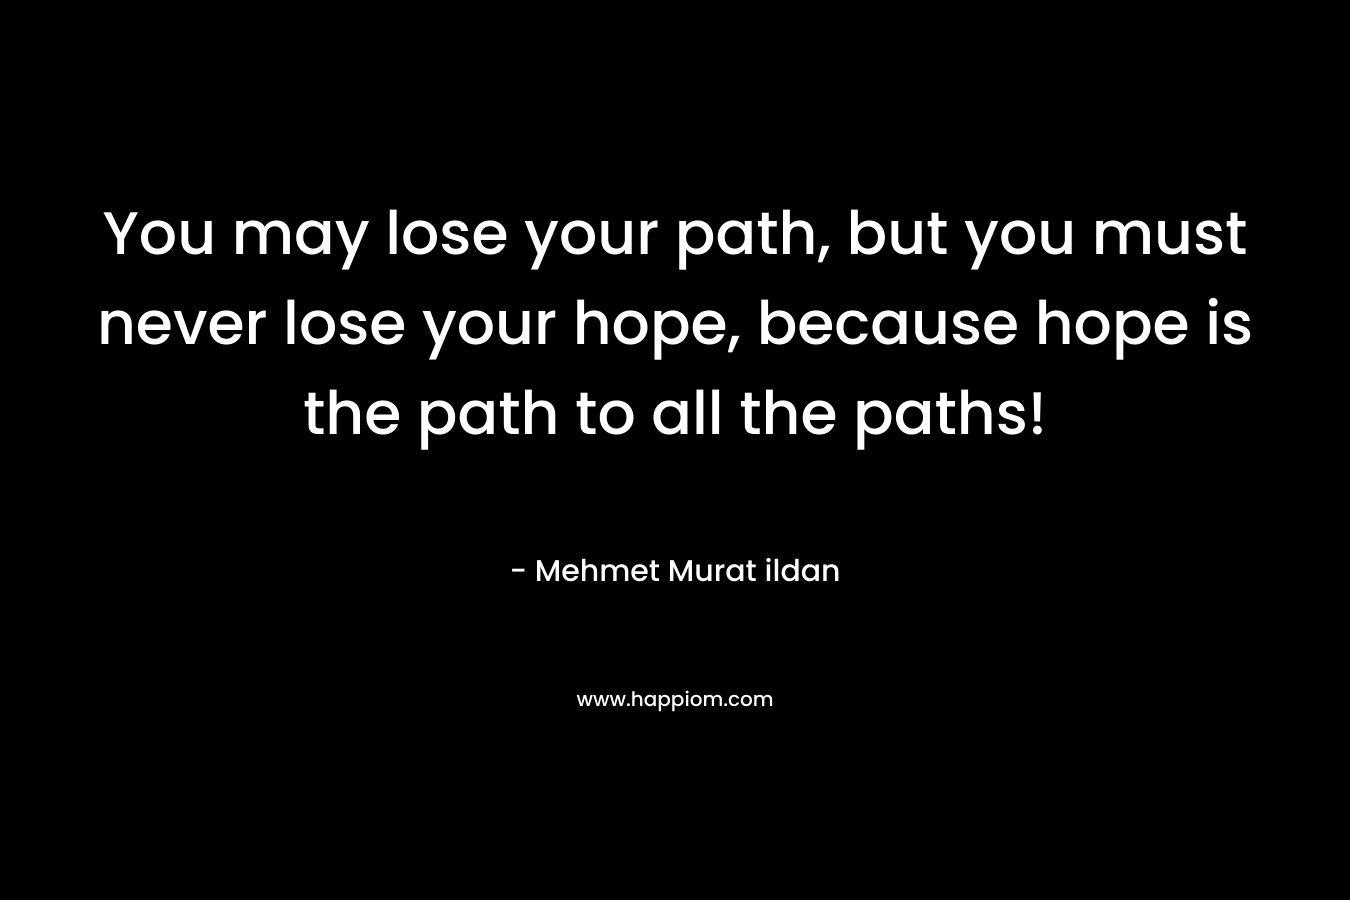 You may lose your path, but you must never lose your hope, because hope is the path to all the paths!